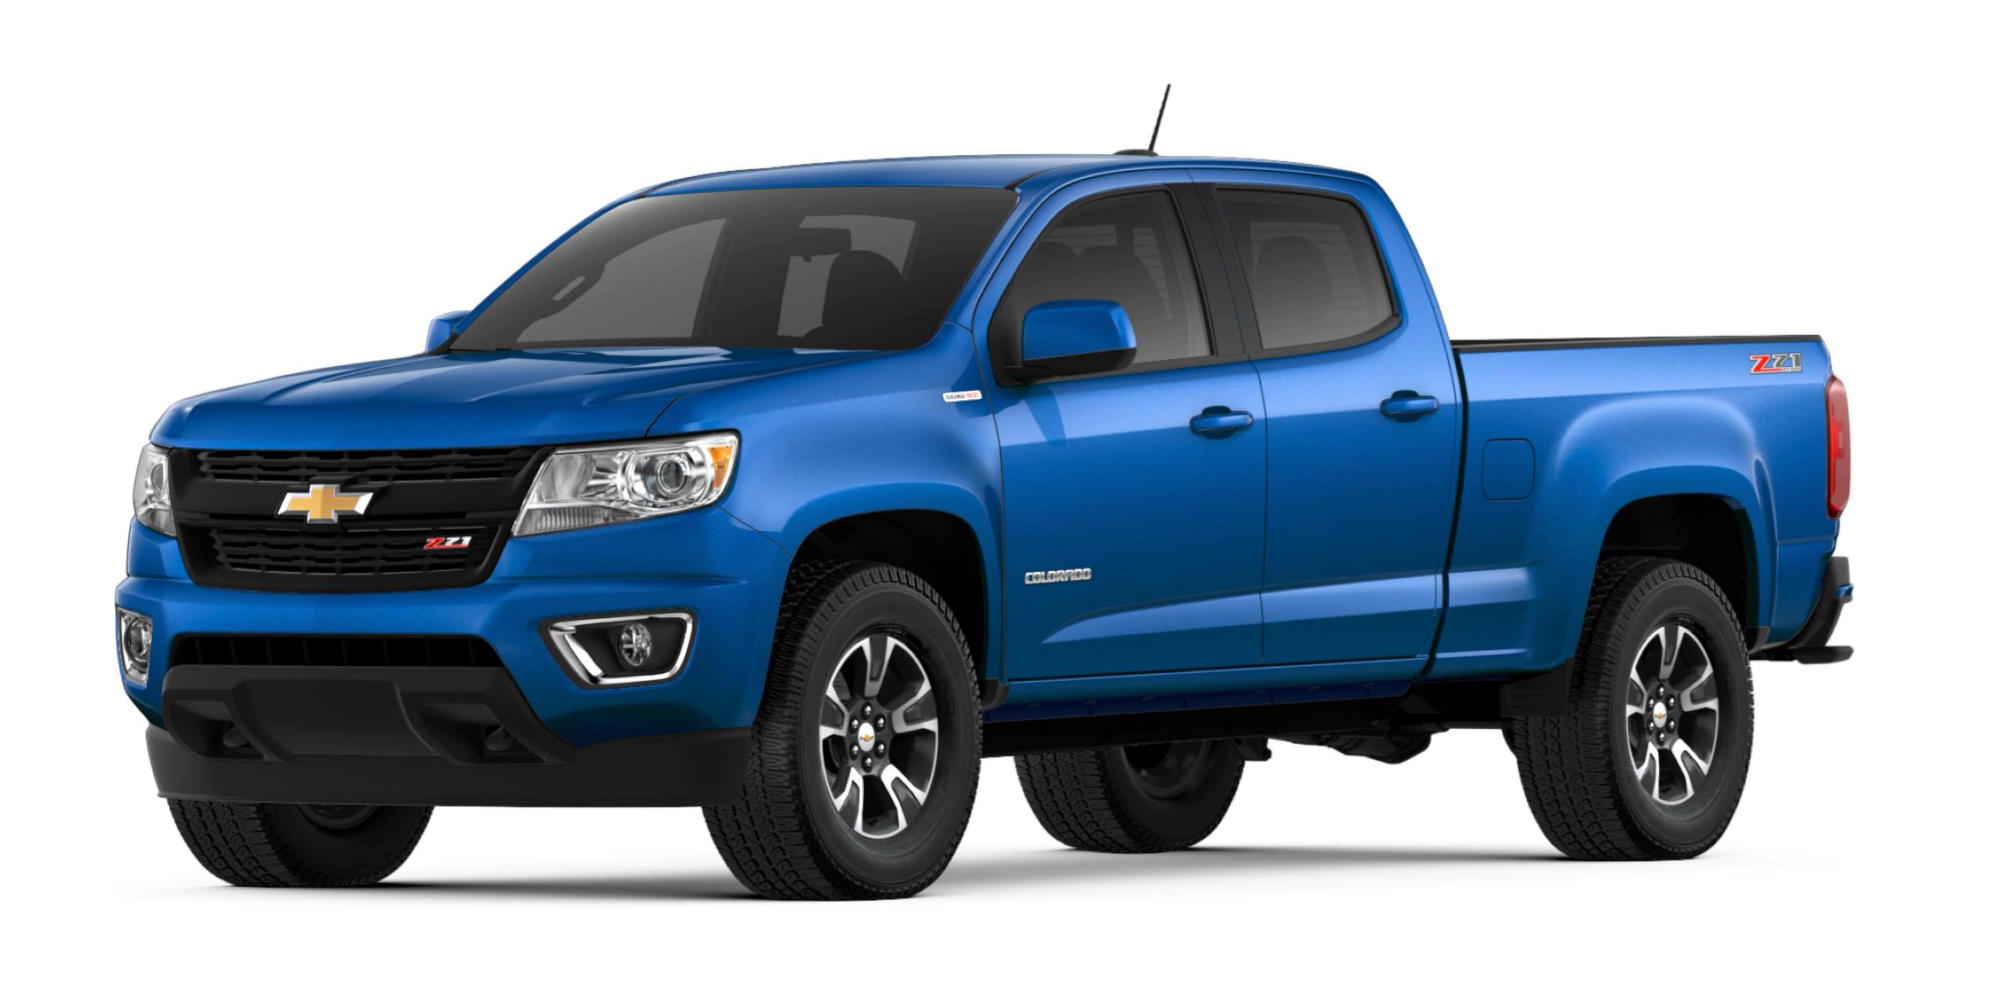 2018 Chevrolet Colorado Z71 Full Specs, Features and Price | CarBuzz